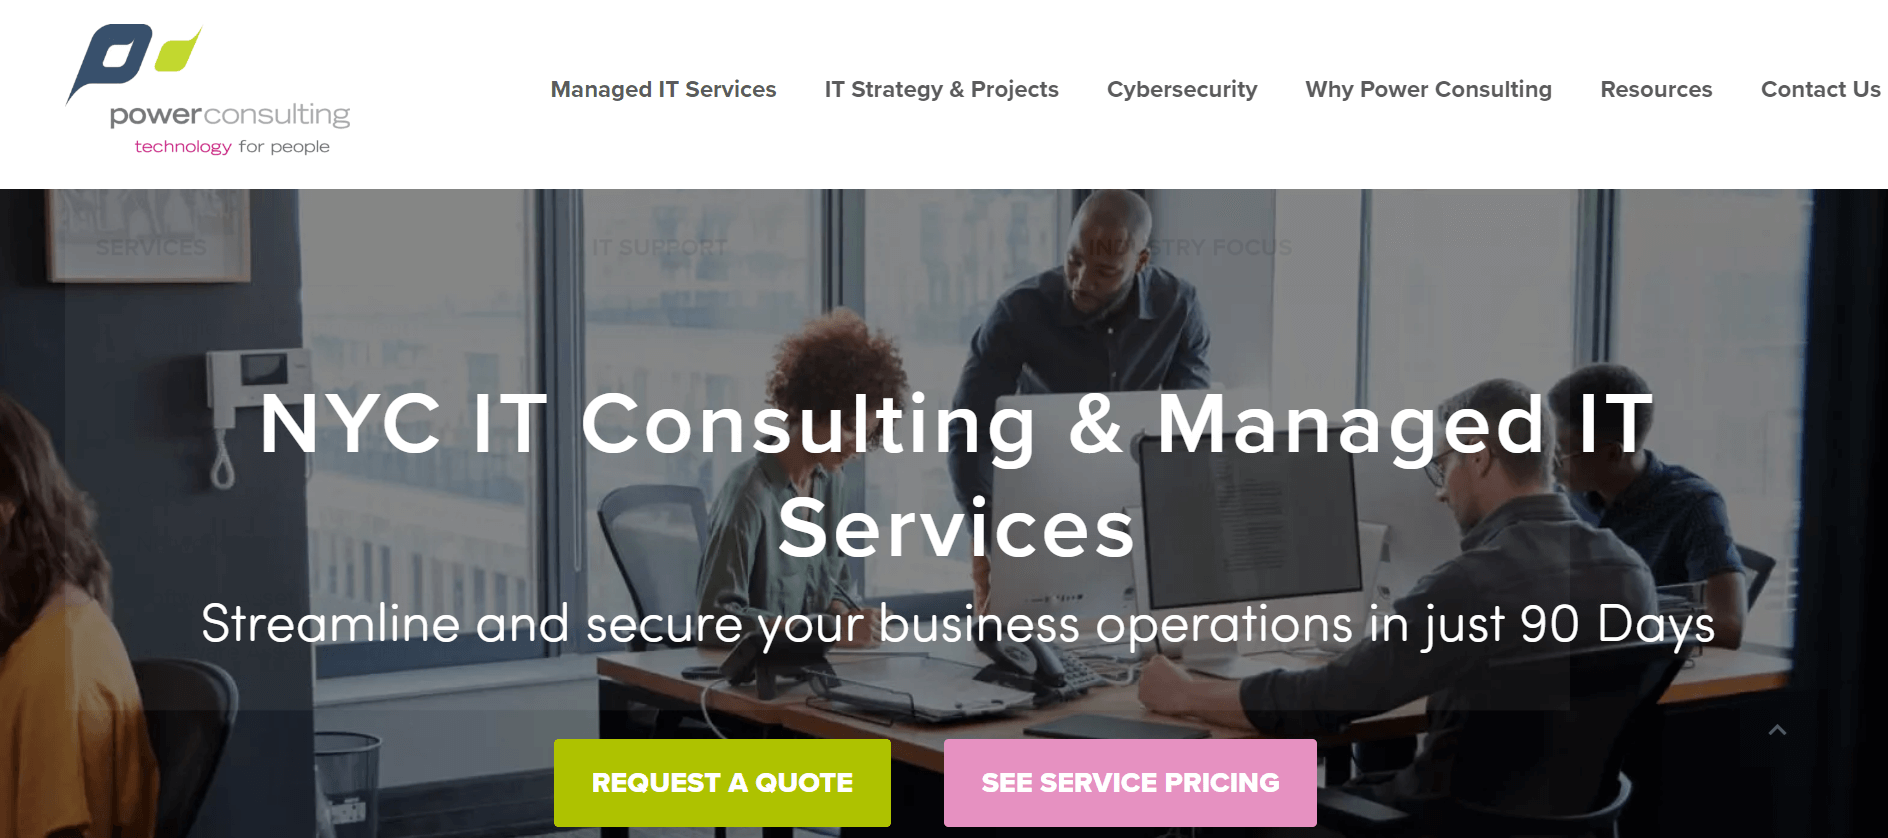 Power Consulting homepage